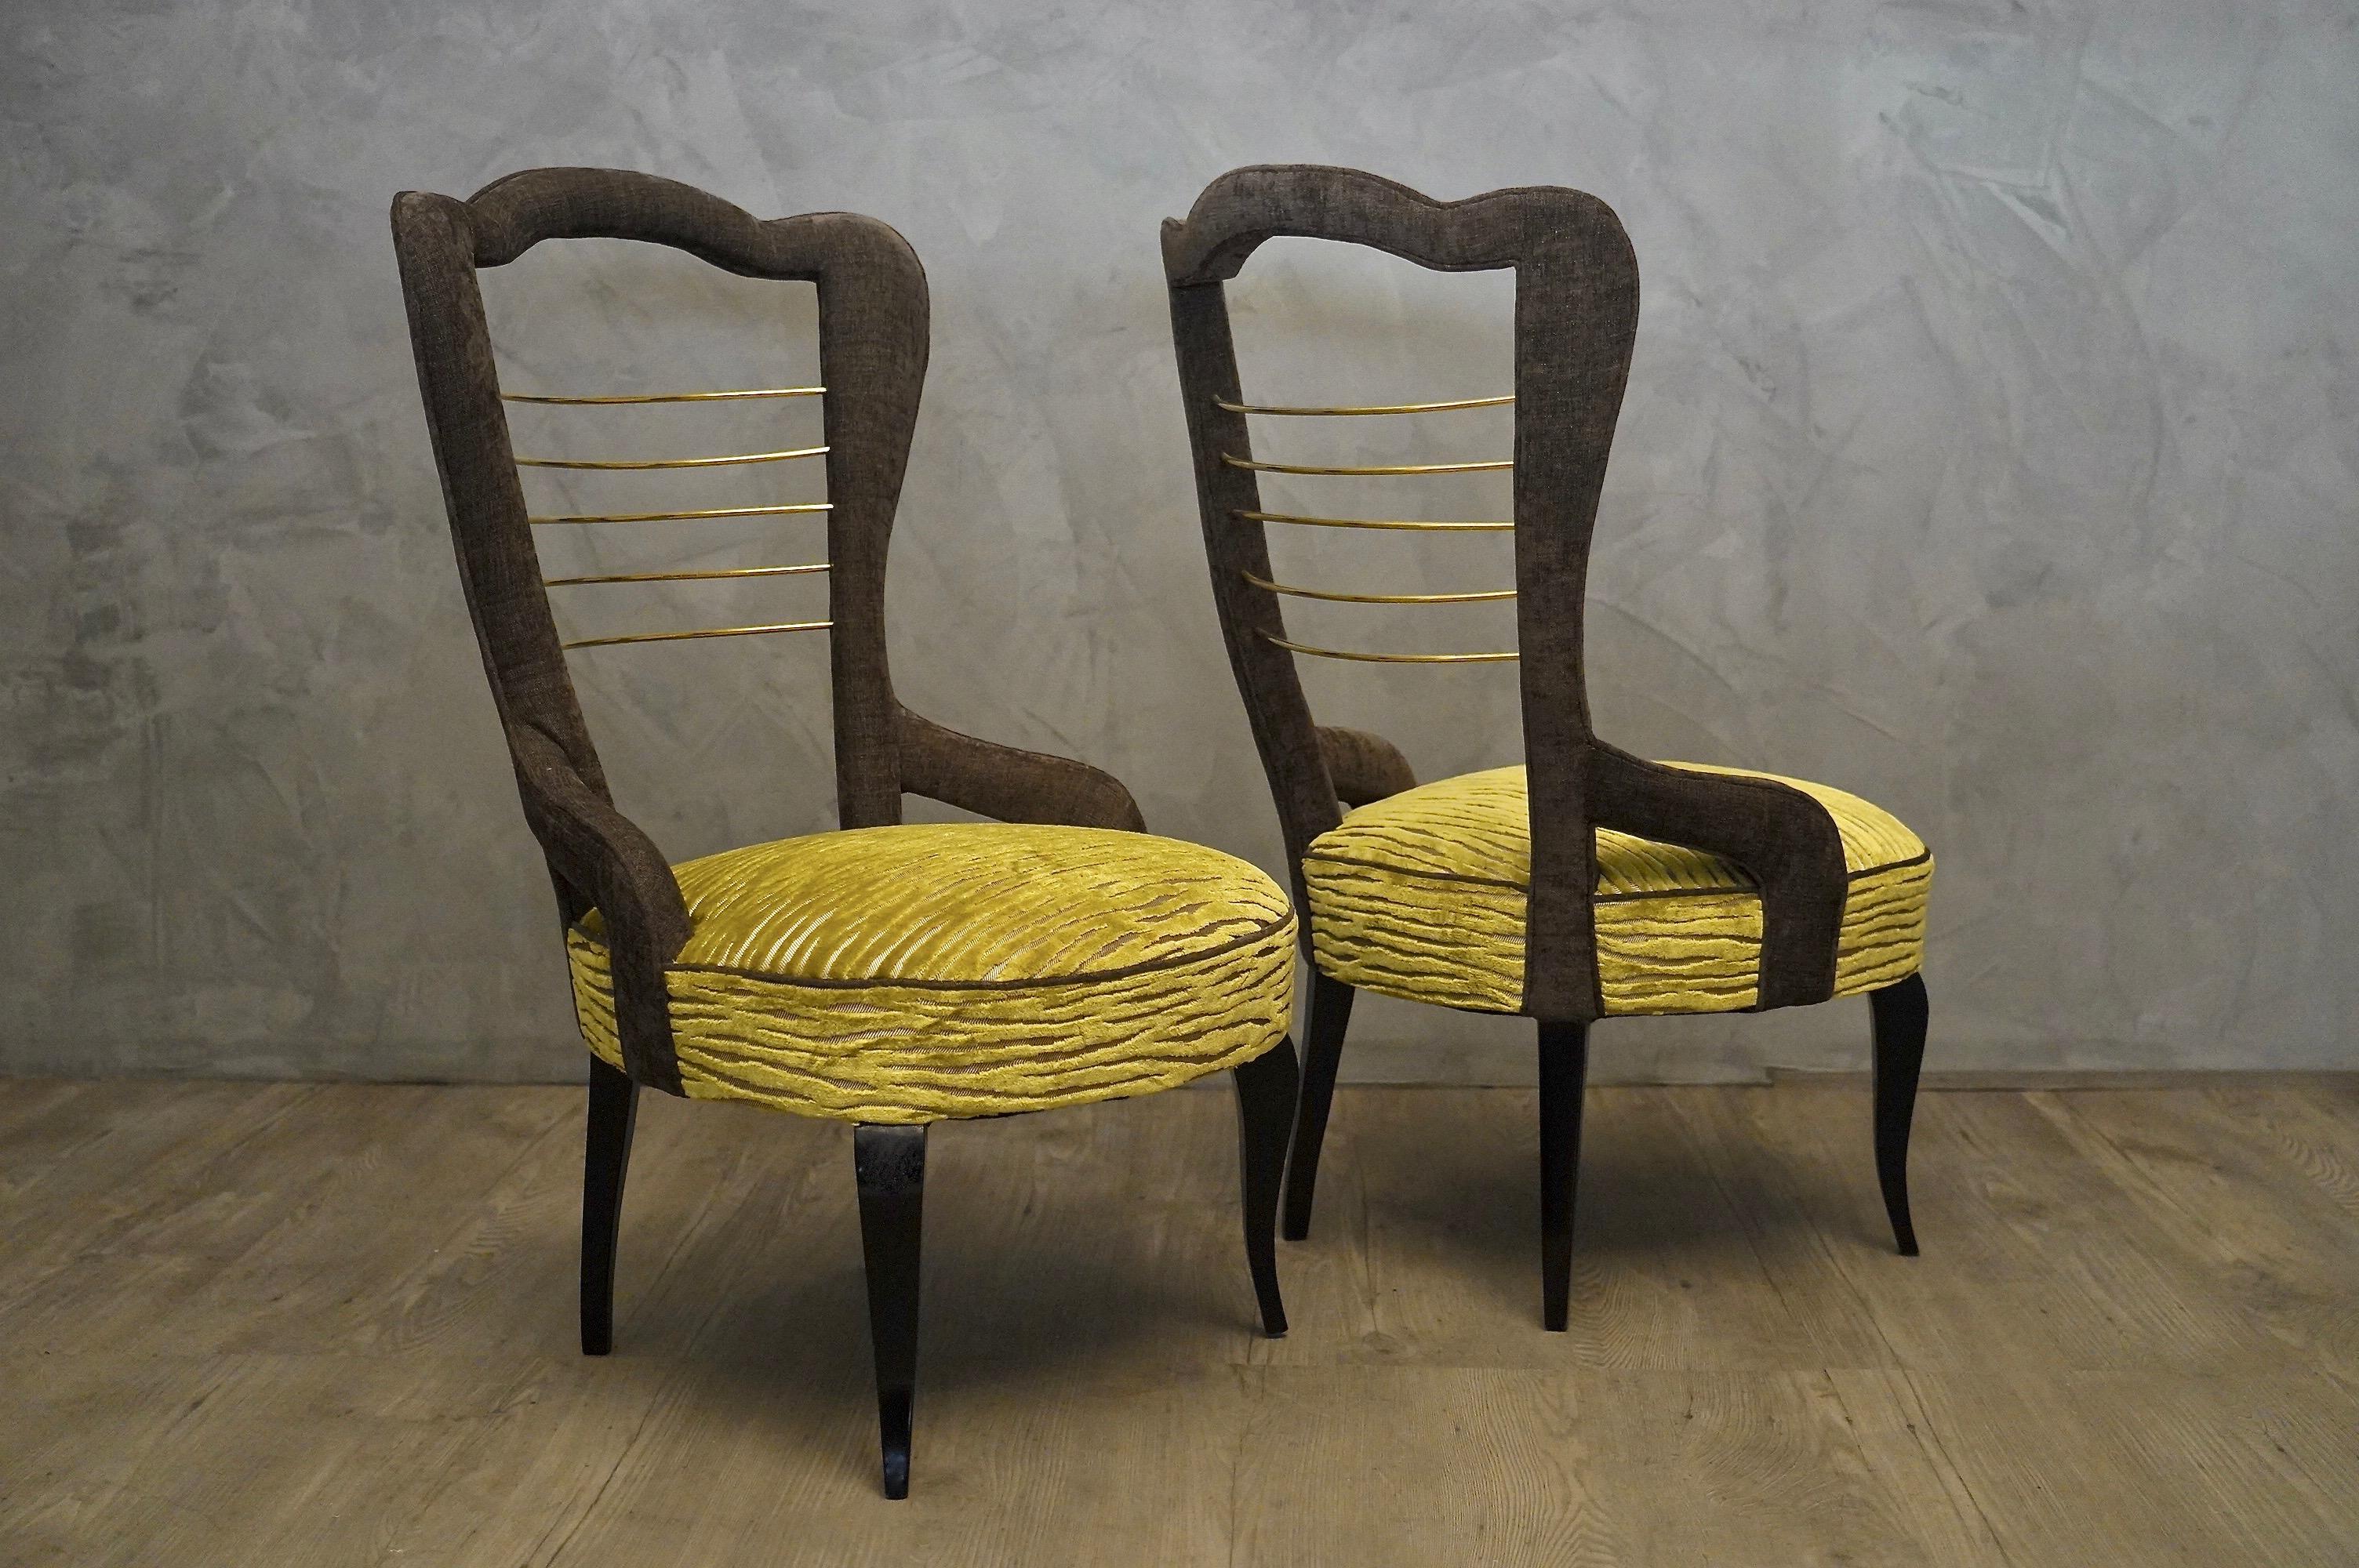 Pair of Midcentury Green Velvet and Brass Italian Chairs, 1950 For Sale 2